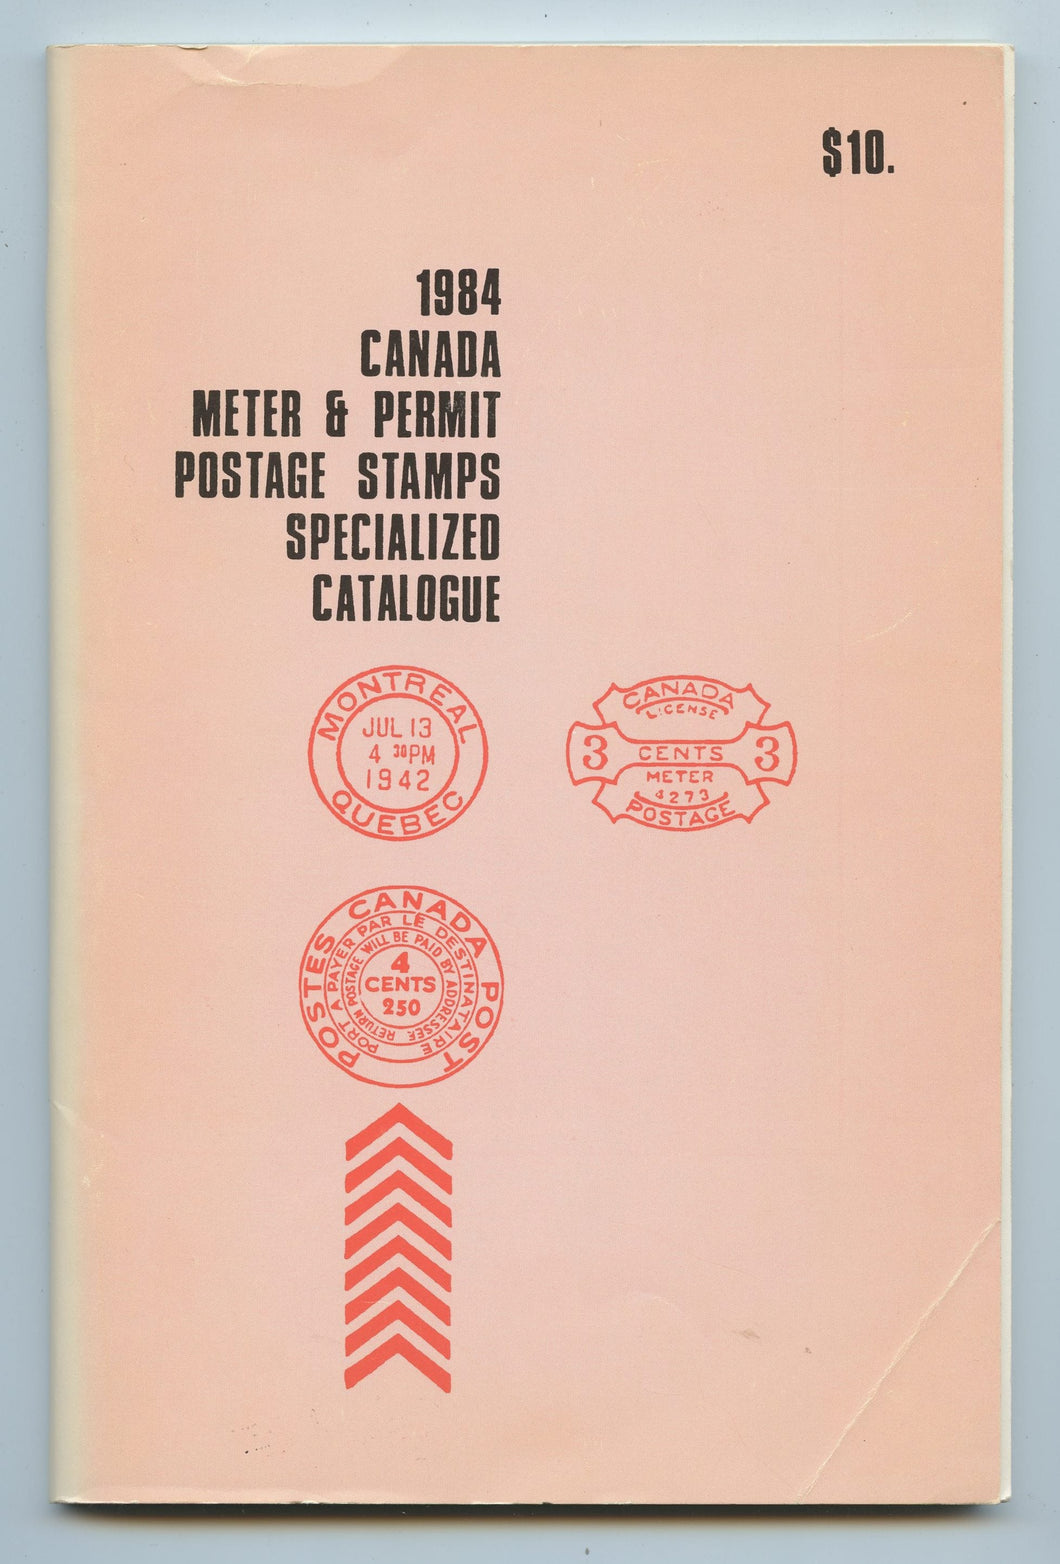 1984 Canada Meter & Permit Postage Stamps Specialized Catalogue